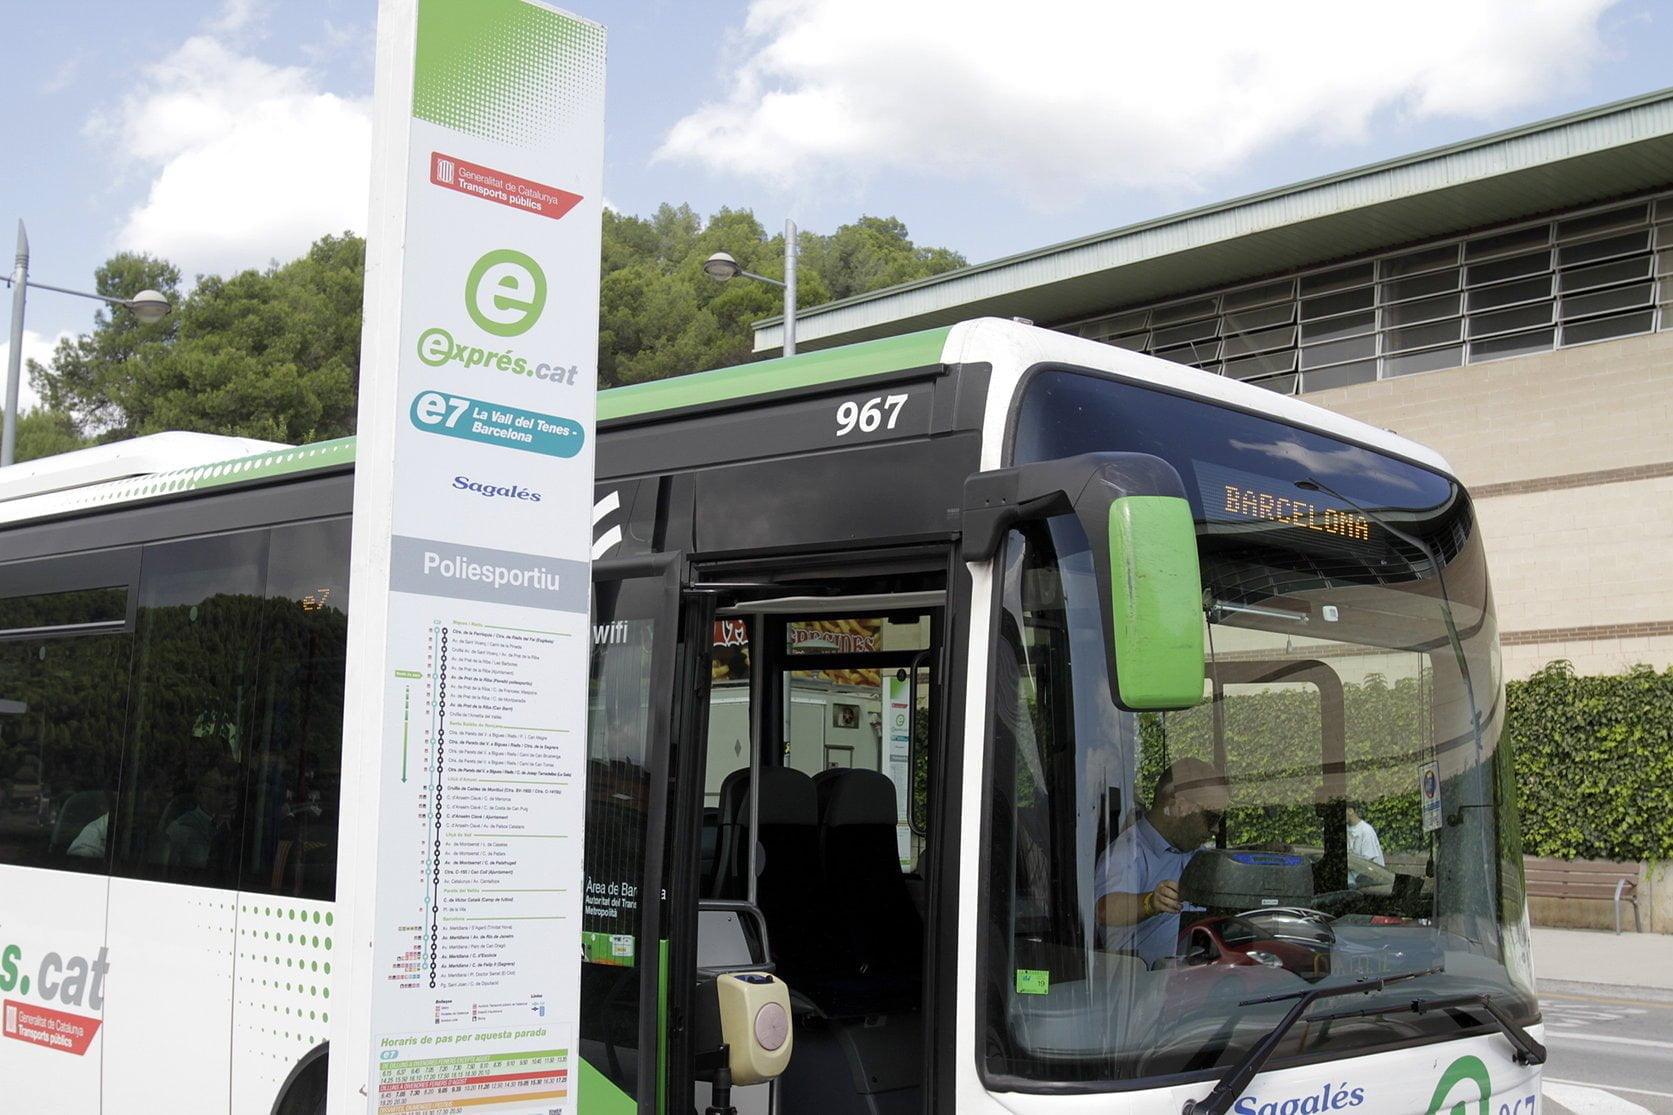 Catalonia enhances services and launches new initiatives to adapt to growing express bus ridership